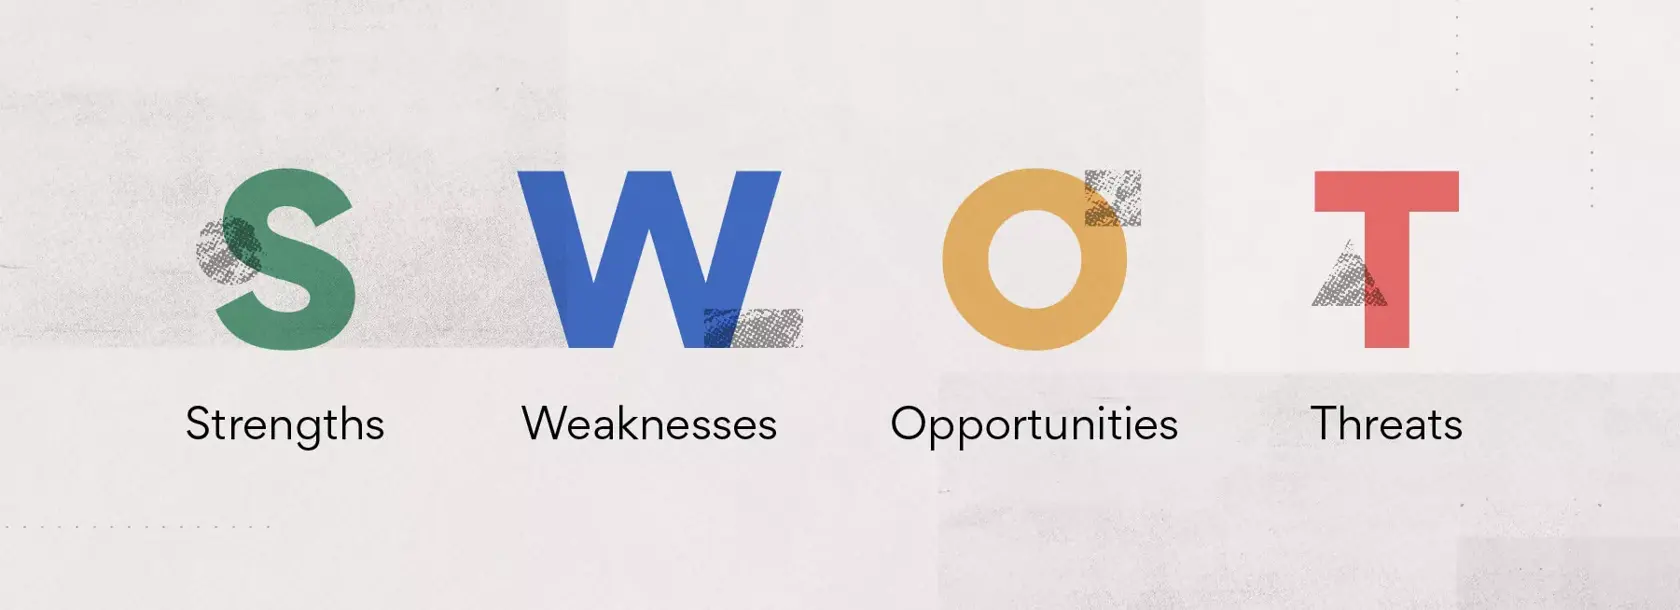 Strengths, weaknesses, opportunities, and threats